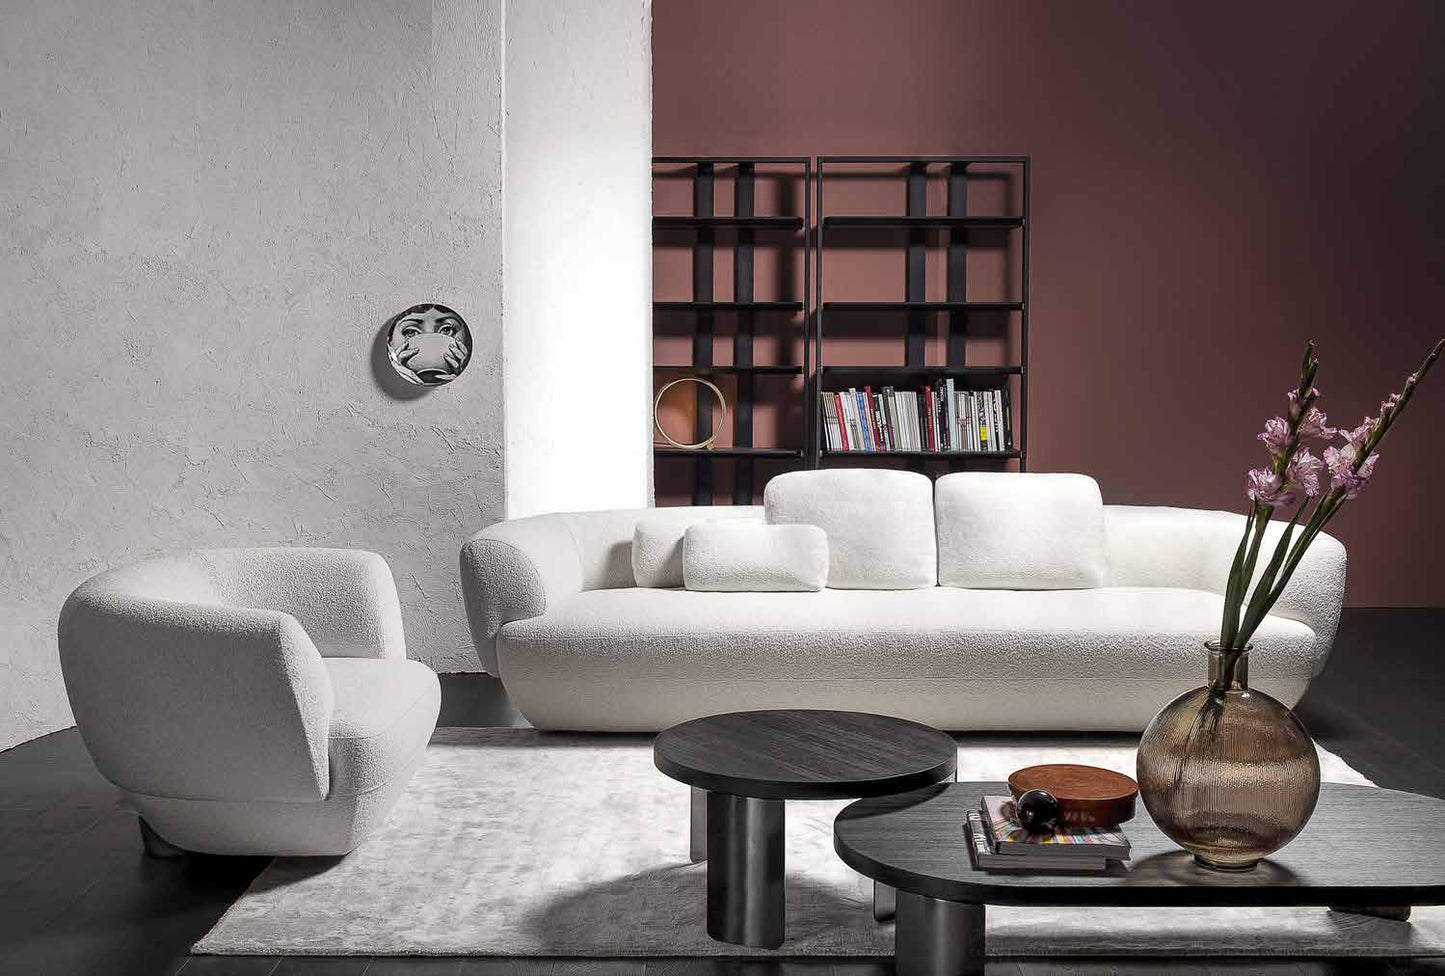 360 CONFIDENT | Sofa by Vibieffe $12,748.00